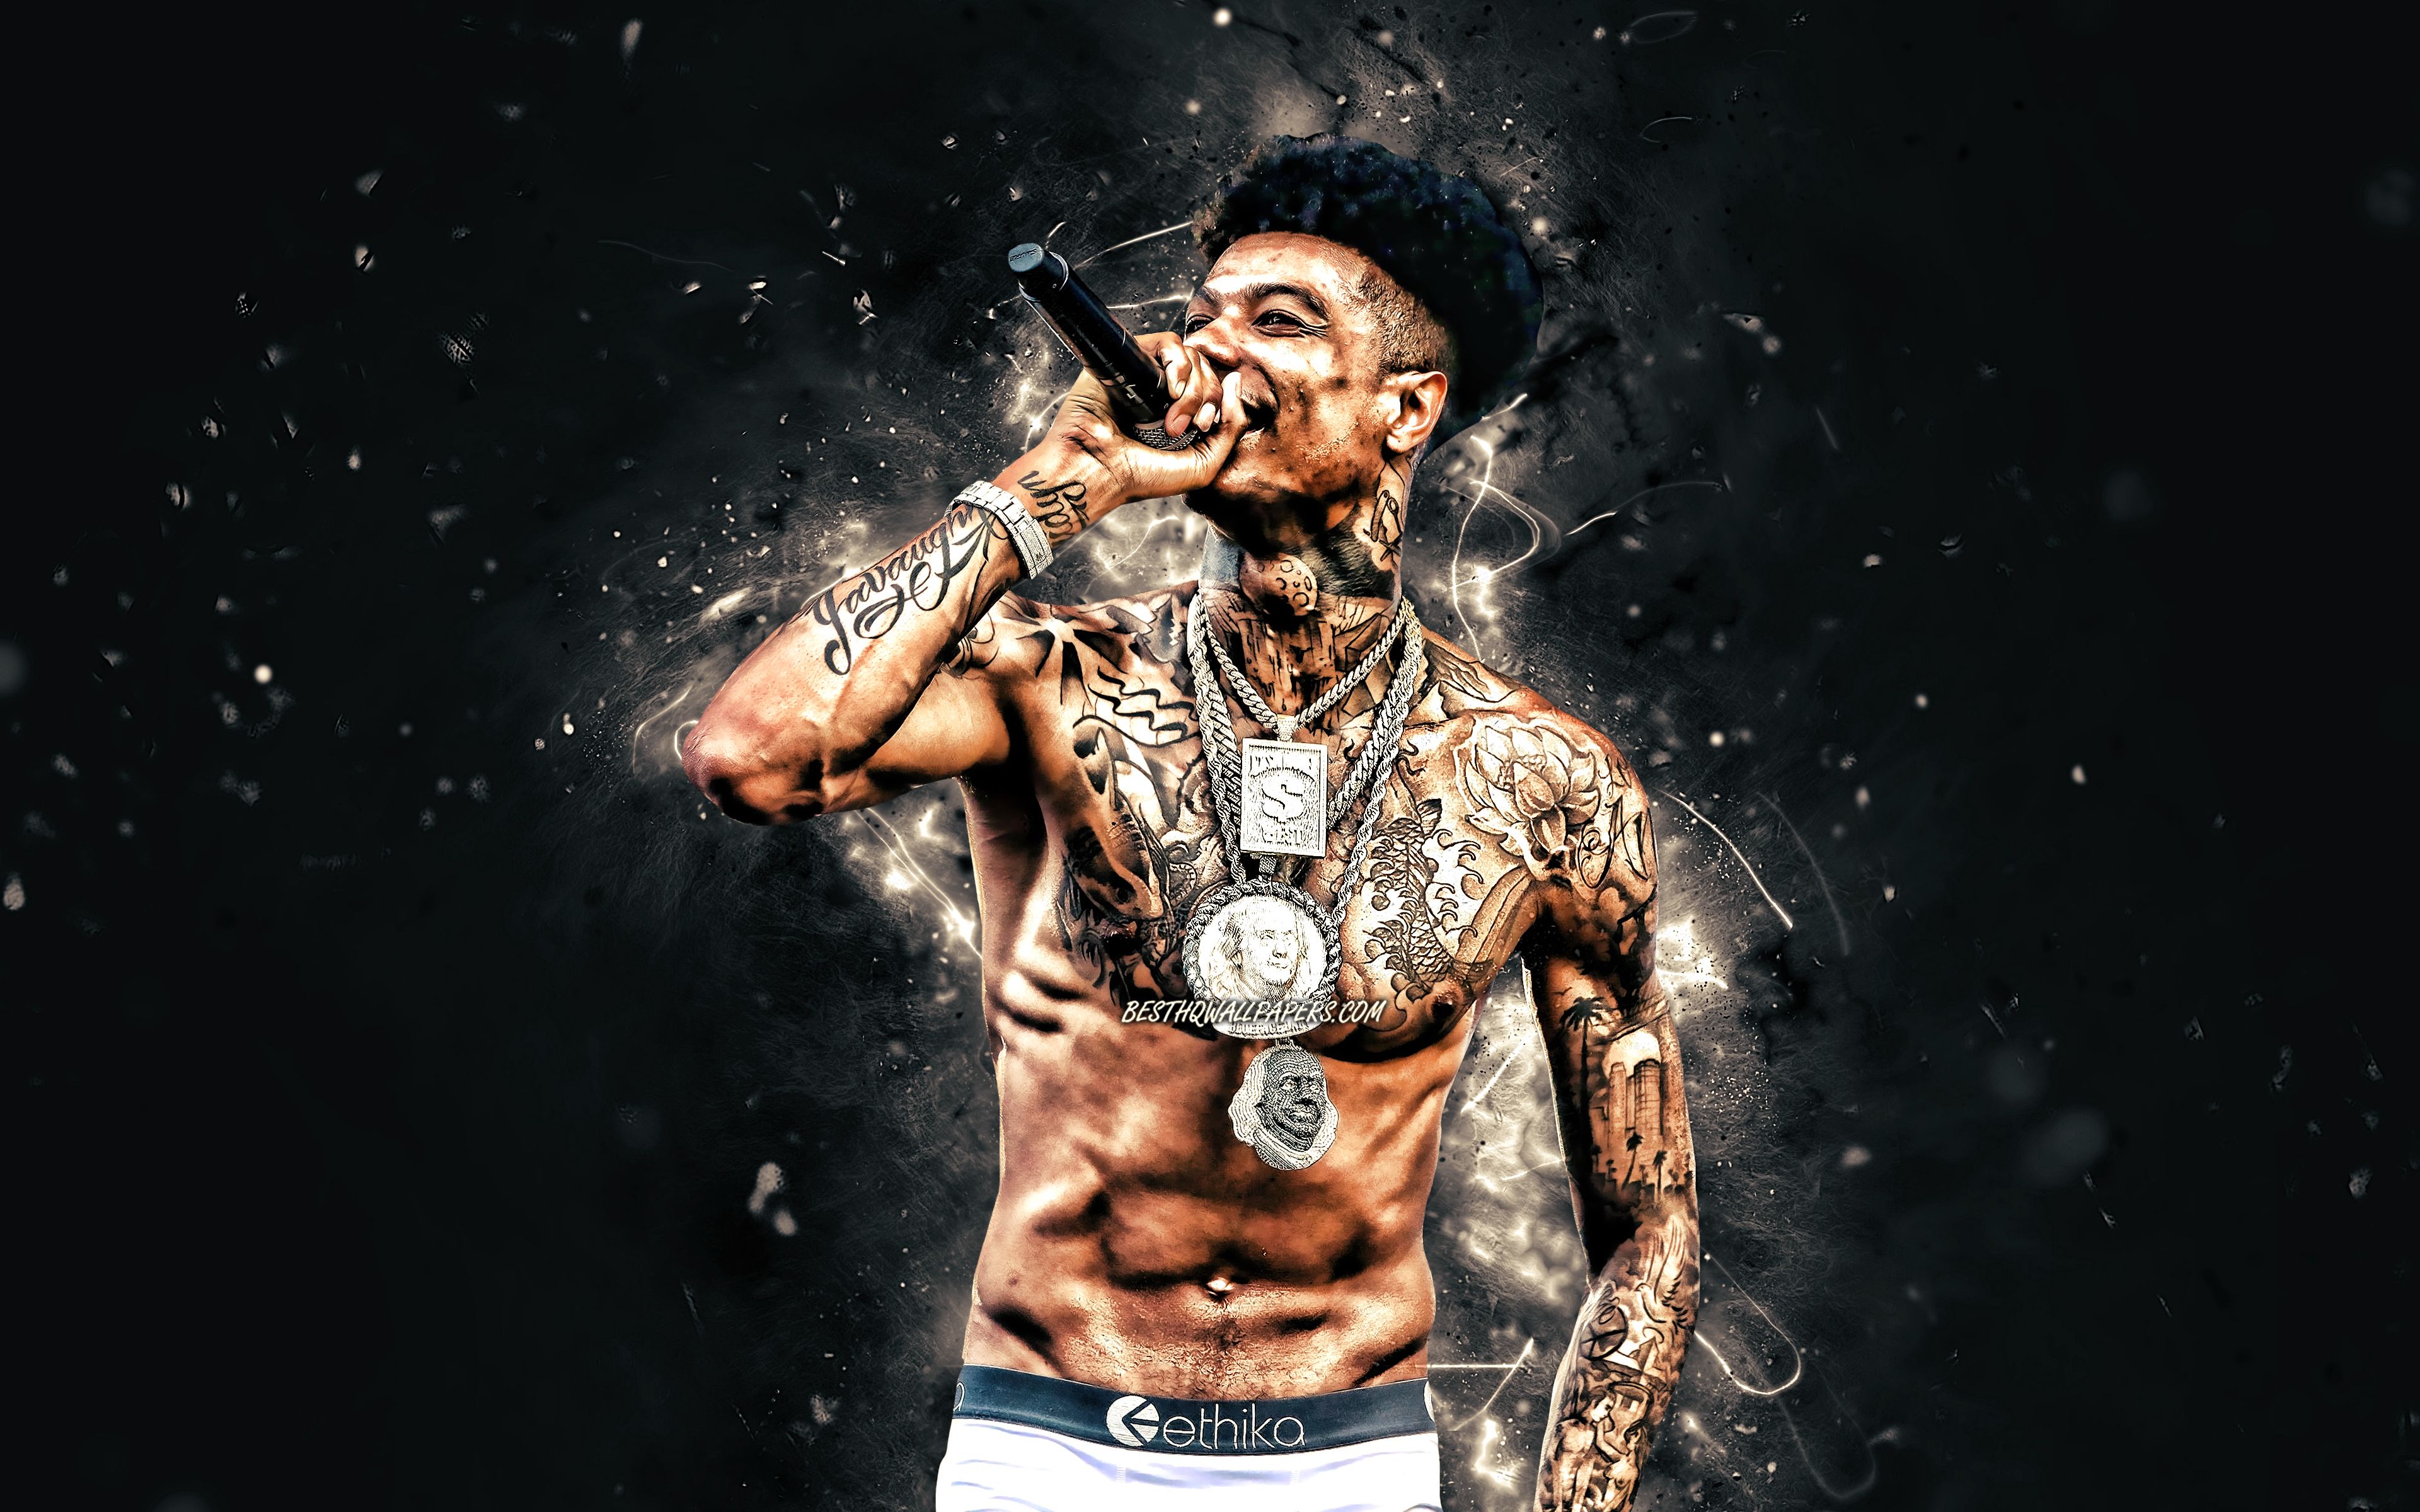 Download wallpaper Blueface, 4k, white neon lights, american rapper, concert, music stars, creative, Migos, Blueface with microphone, Johnathan Porter, american celebrity, Blueface 4K for desktop with resolution 3840x2400. High Quality HD